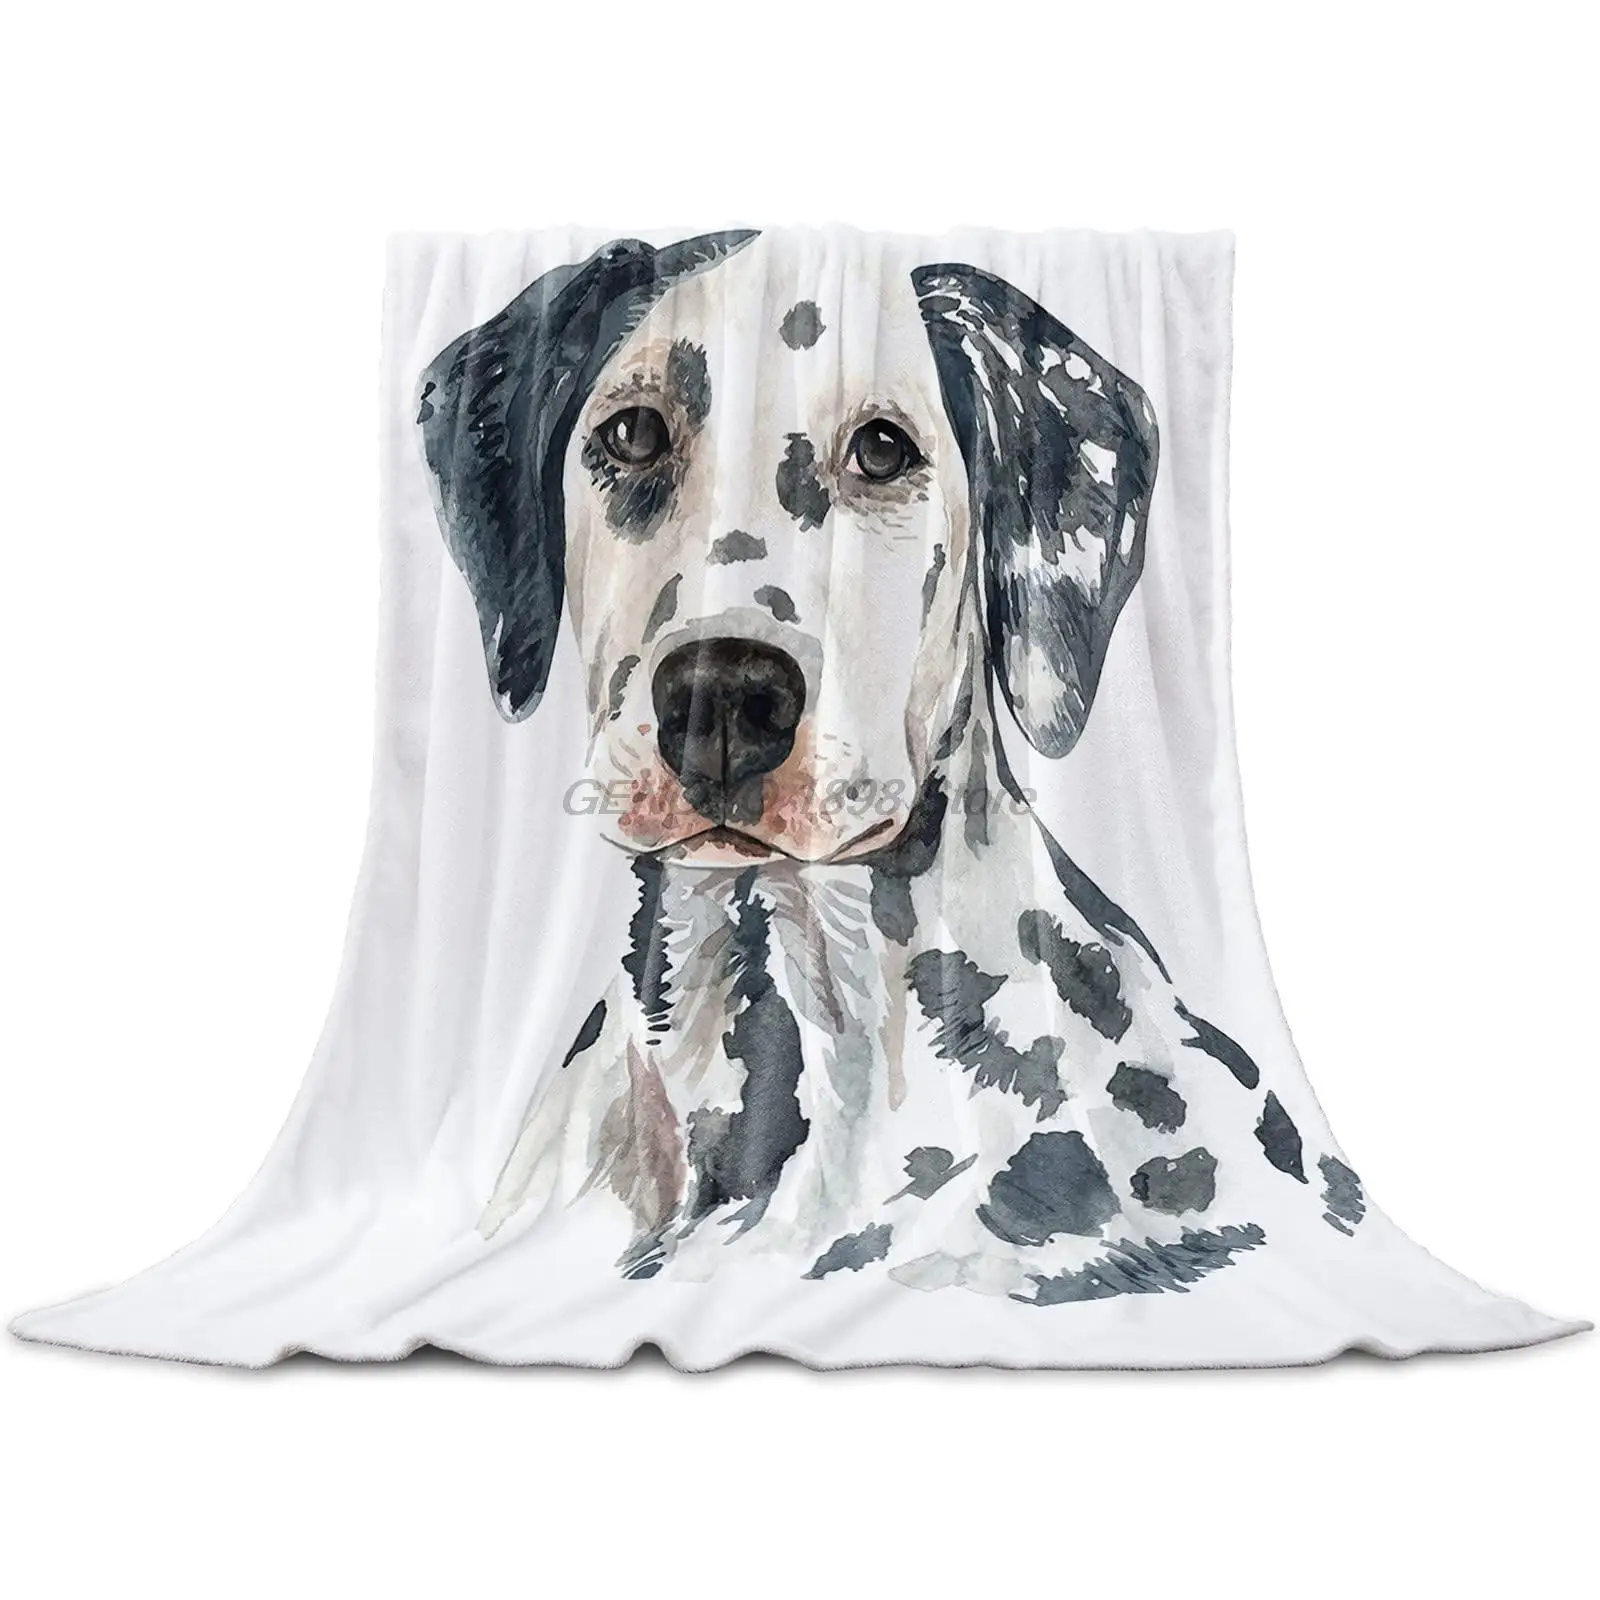 

Fleece Throw Blanket Full Size, Spotty Dog Animal Watercolor Pattern Lightweight Flannel Blankets for Couch Bed Living Room, Wa